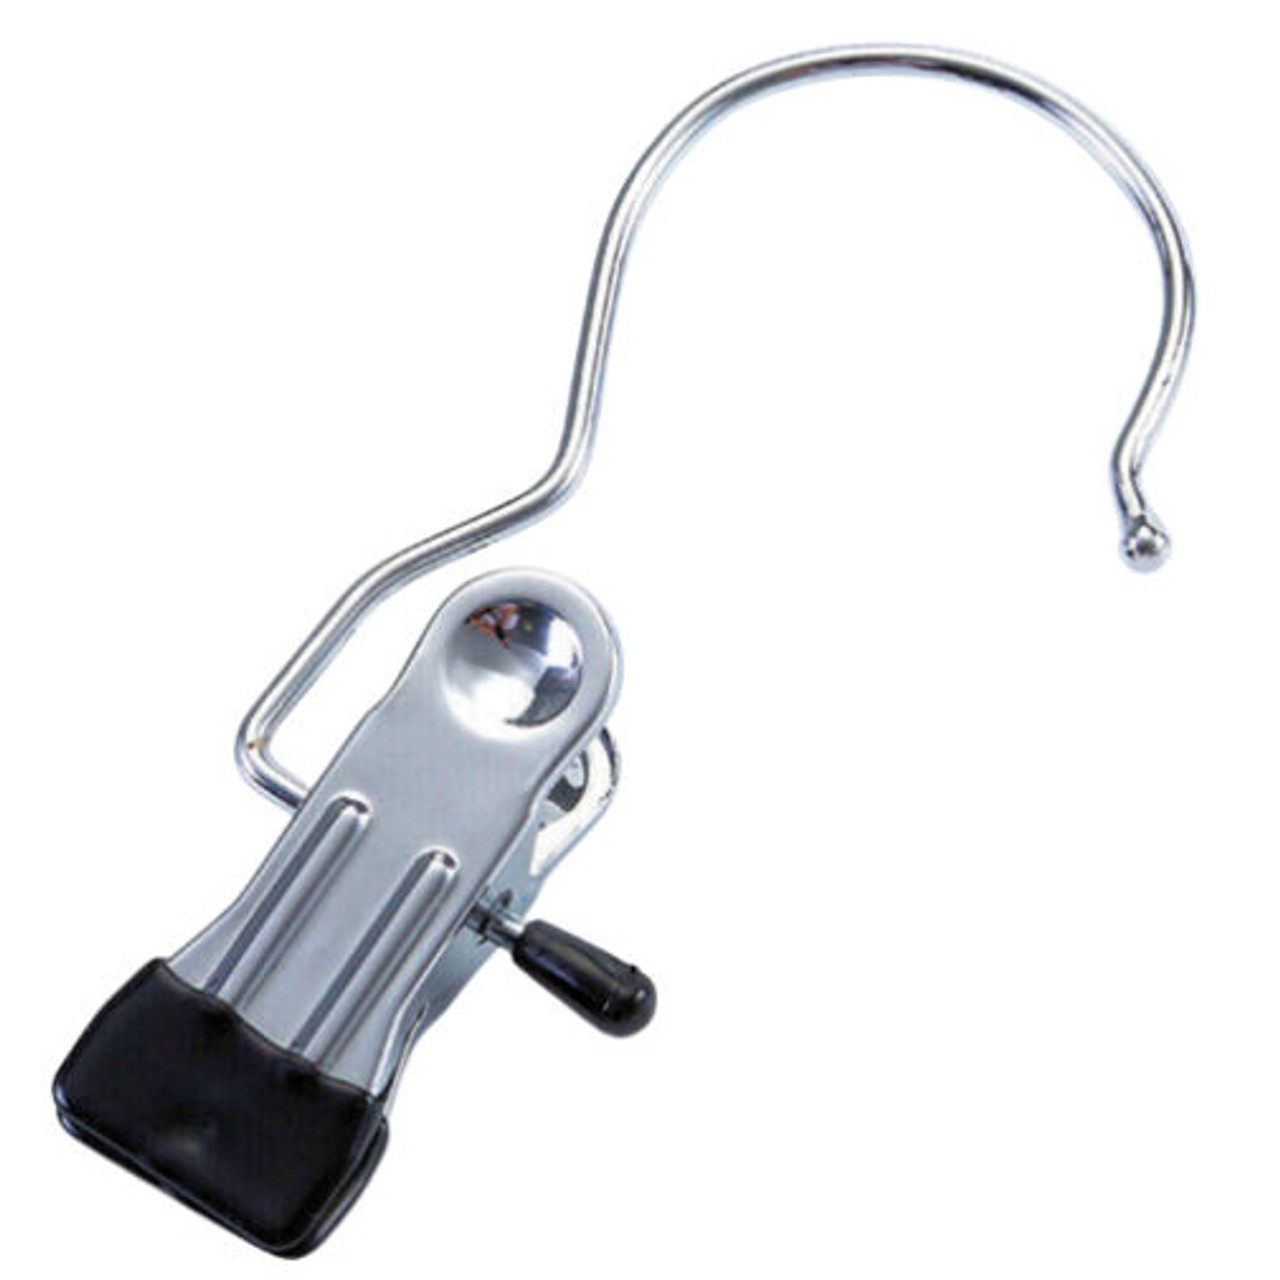 Laundry Clips With Hook, Metal Boot Hanger Chrome Plated Black